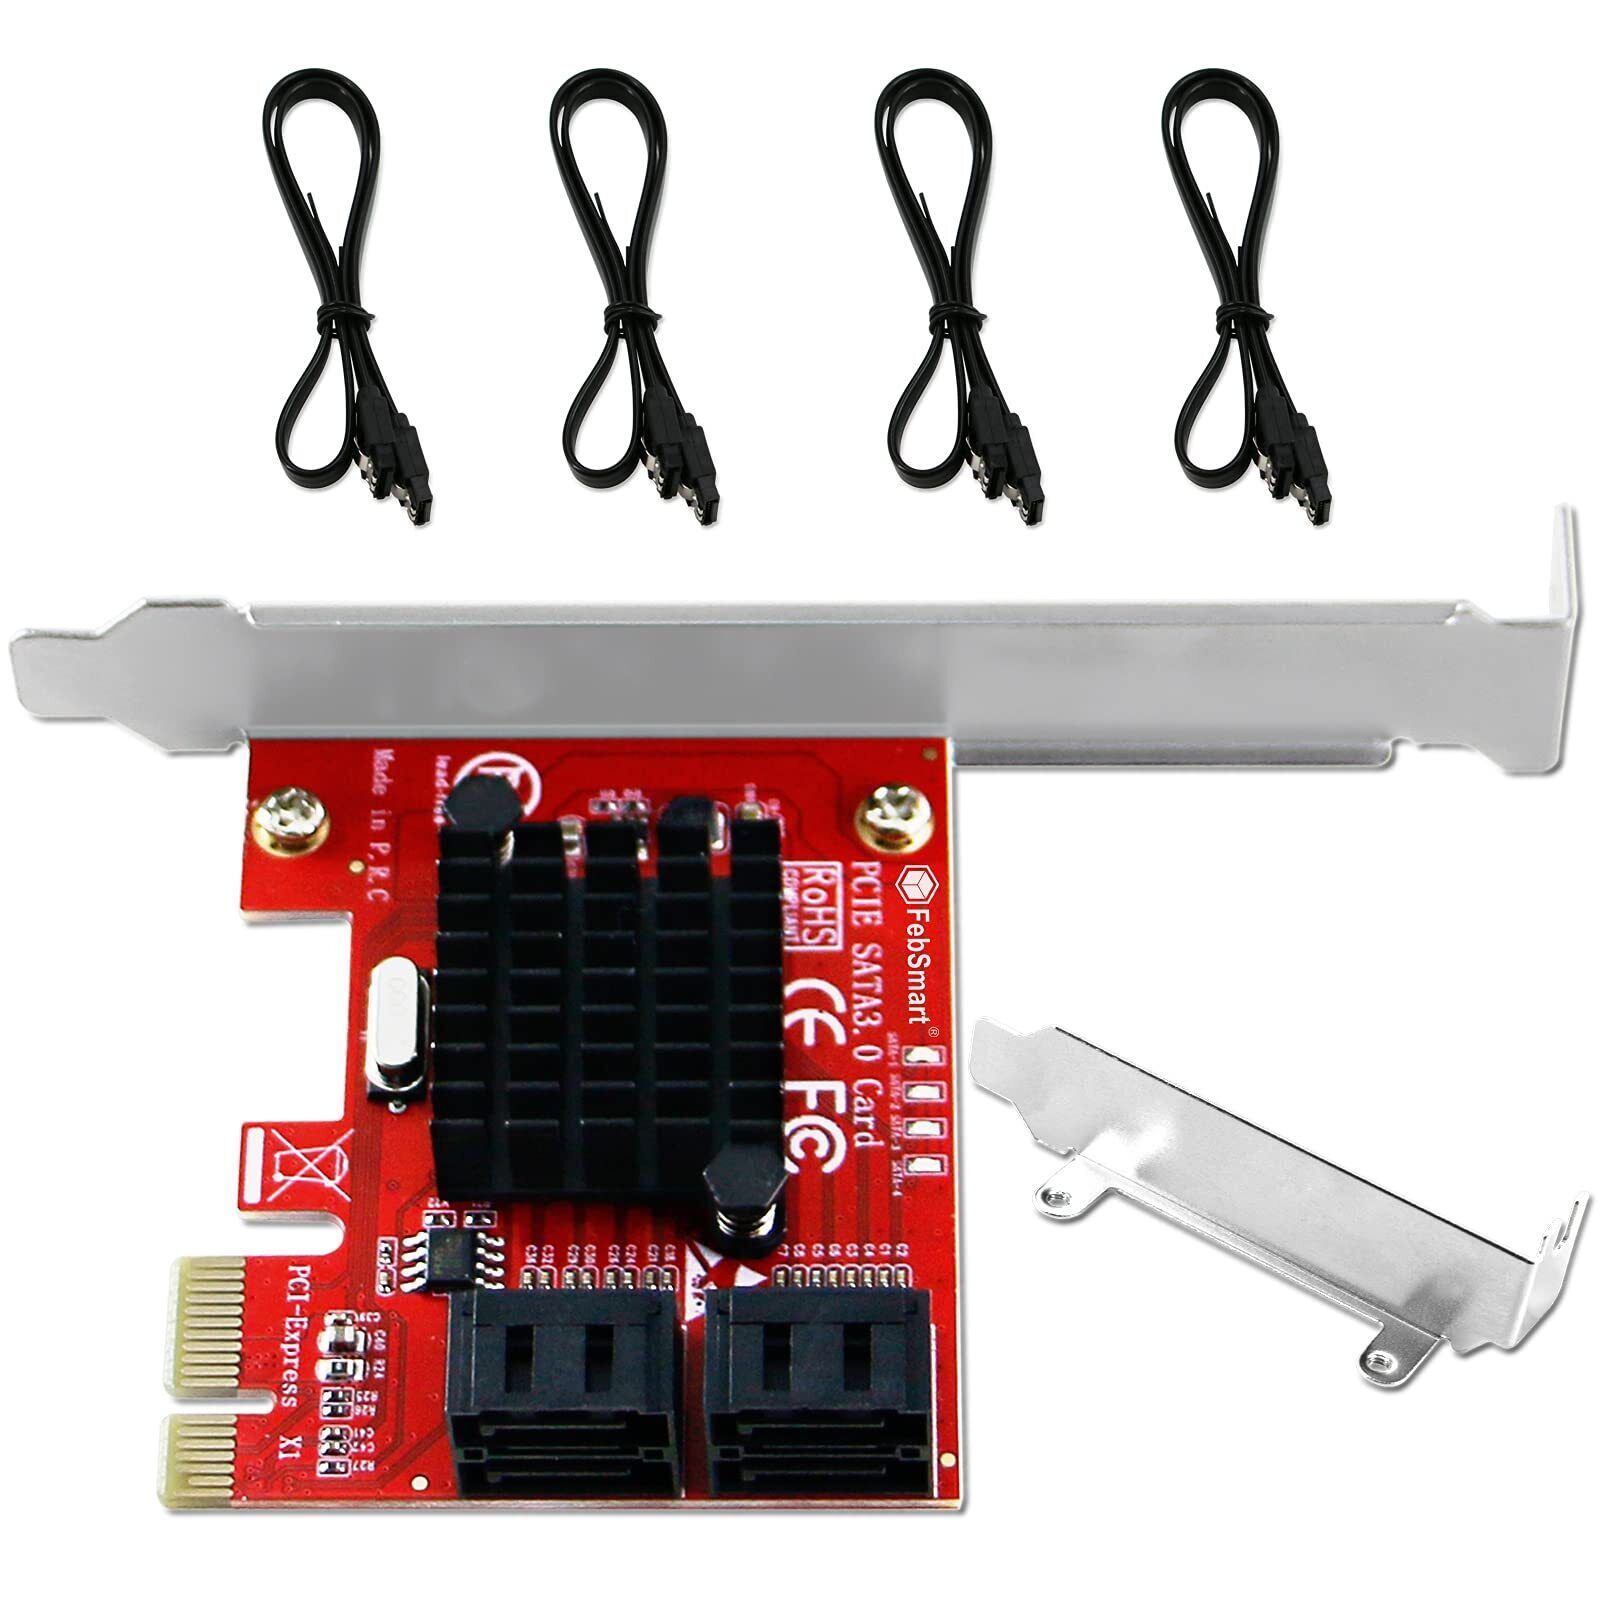 FebSmart PCIE 3.0 to 4-Ports 6Gbps SATA III Expansion Card for Desktop PCs, P...